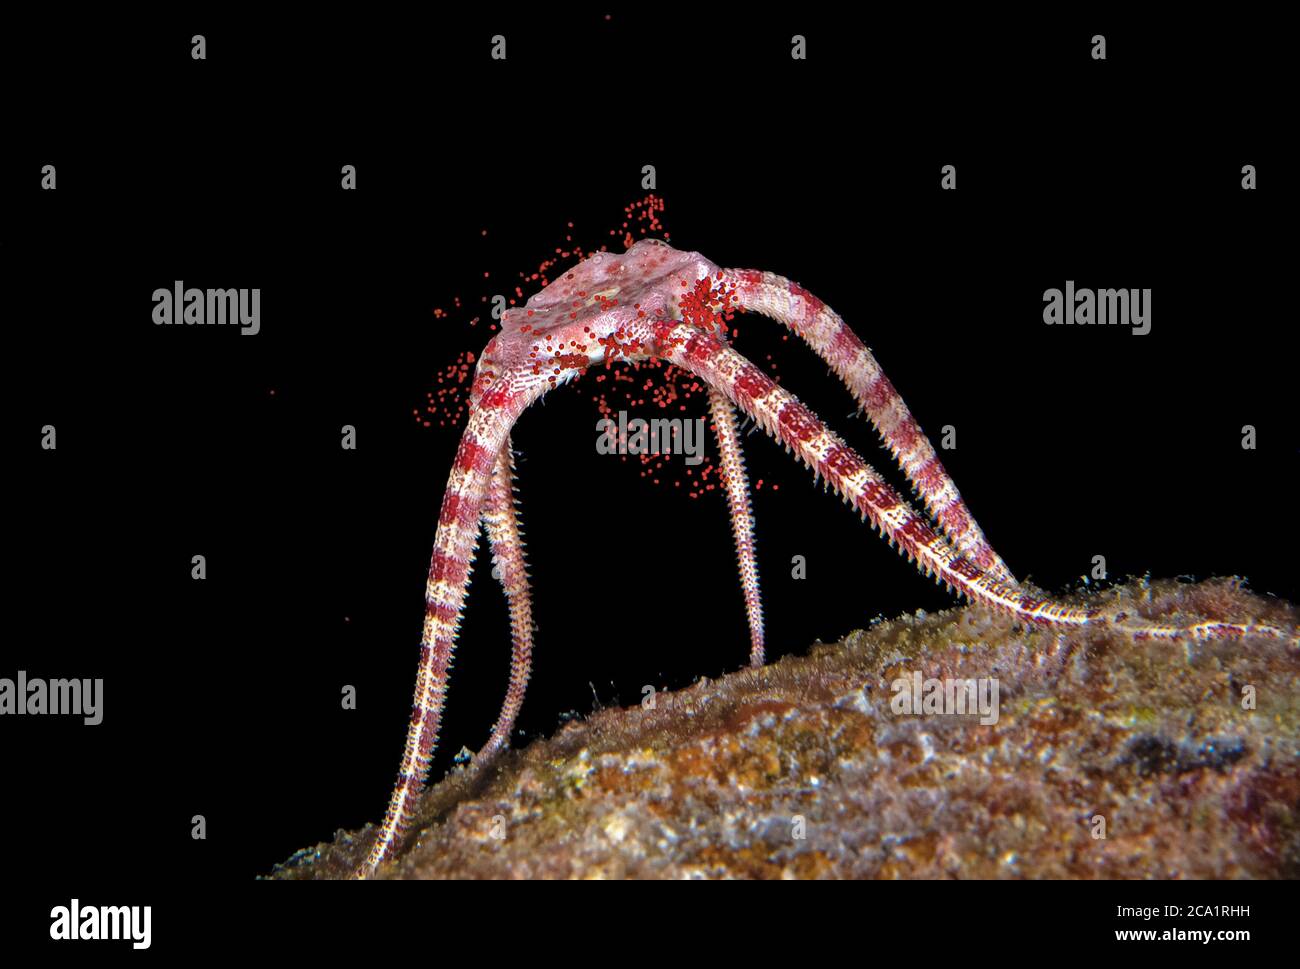 Ruby Brittle Star, Ophioderma rubicunda, releasing its eggs during spawning at night, Bonaire, ABC Islands, Caribbean Netherlands, Caribbean Sea, Atla Stock Photo